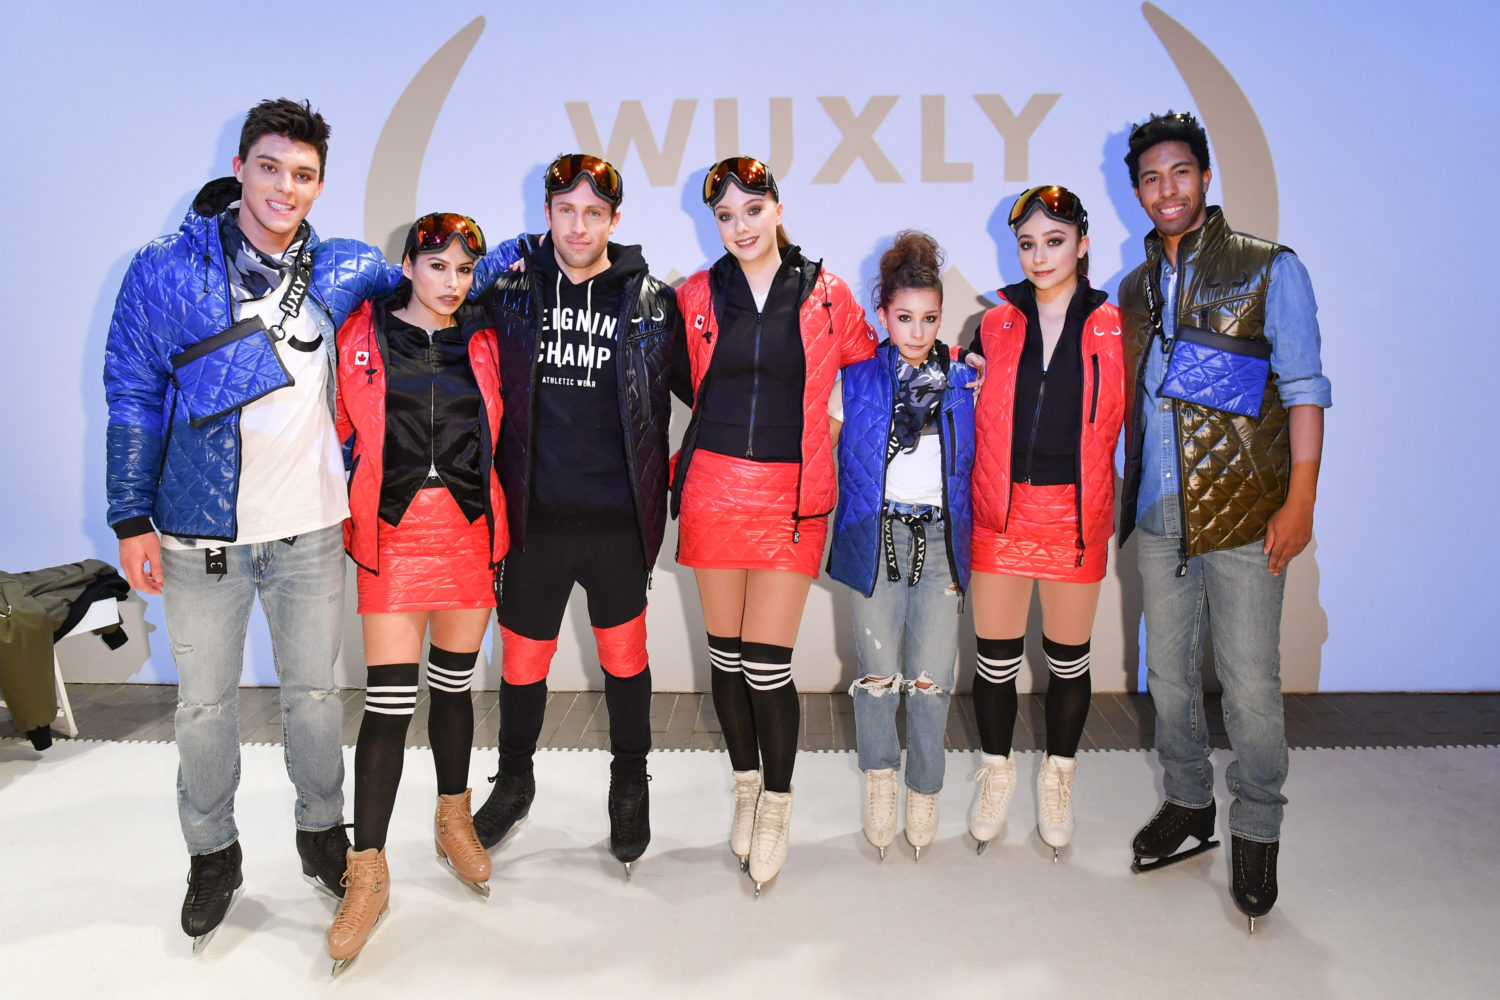 Read more about the article Wuxly Skates Out Of Toronto Fashion Week